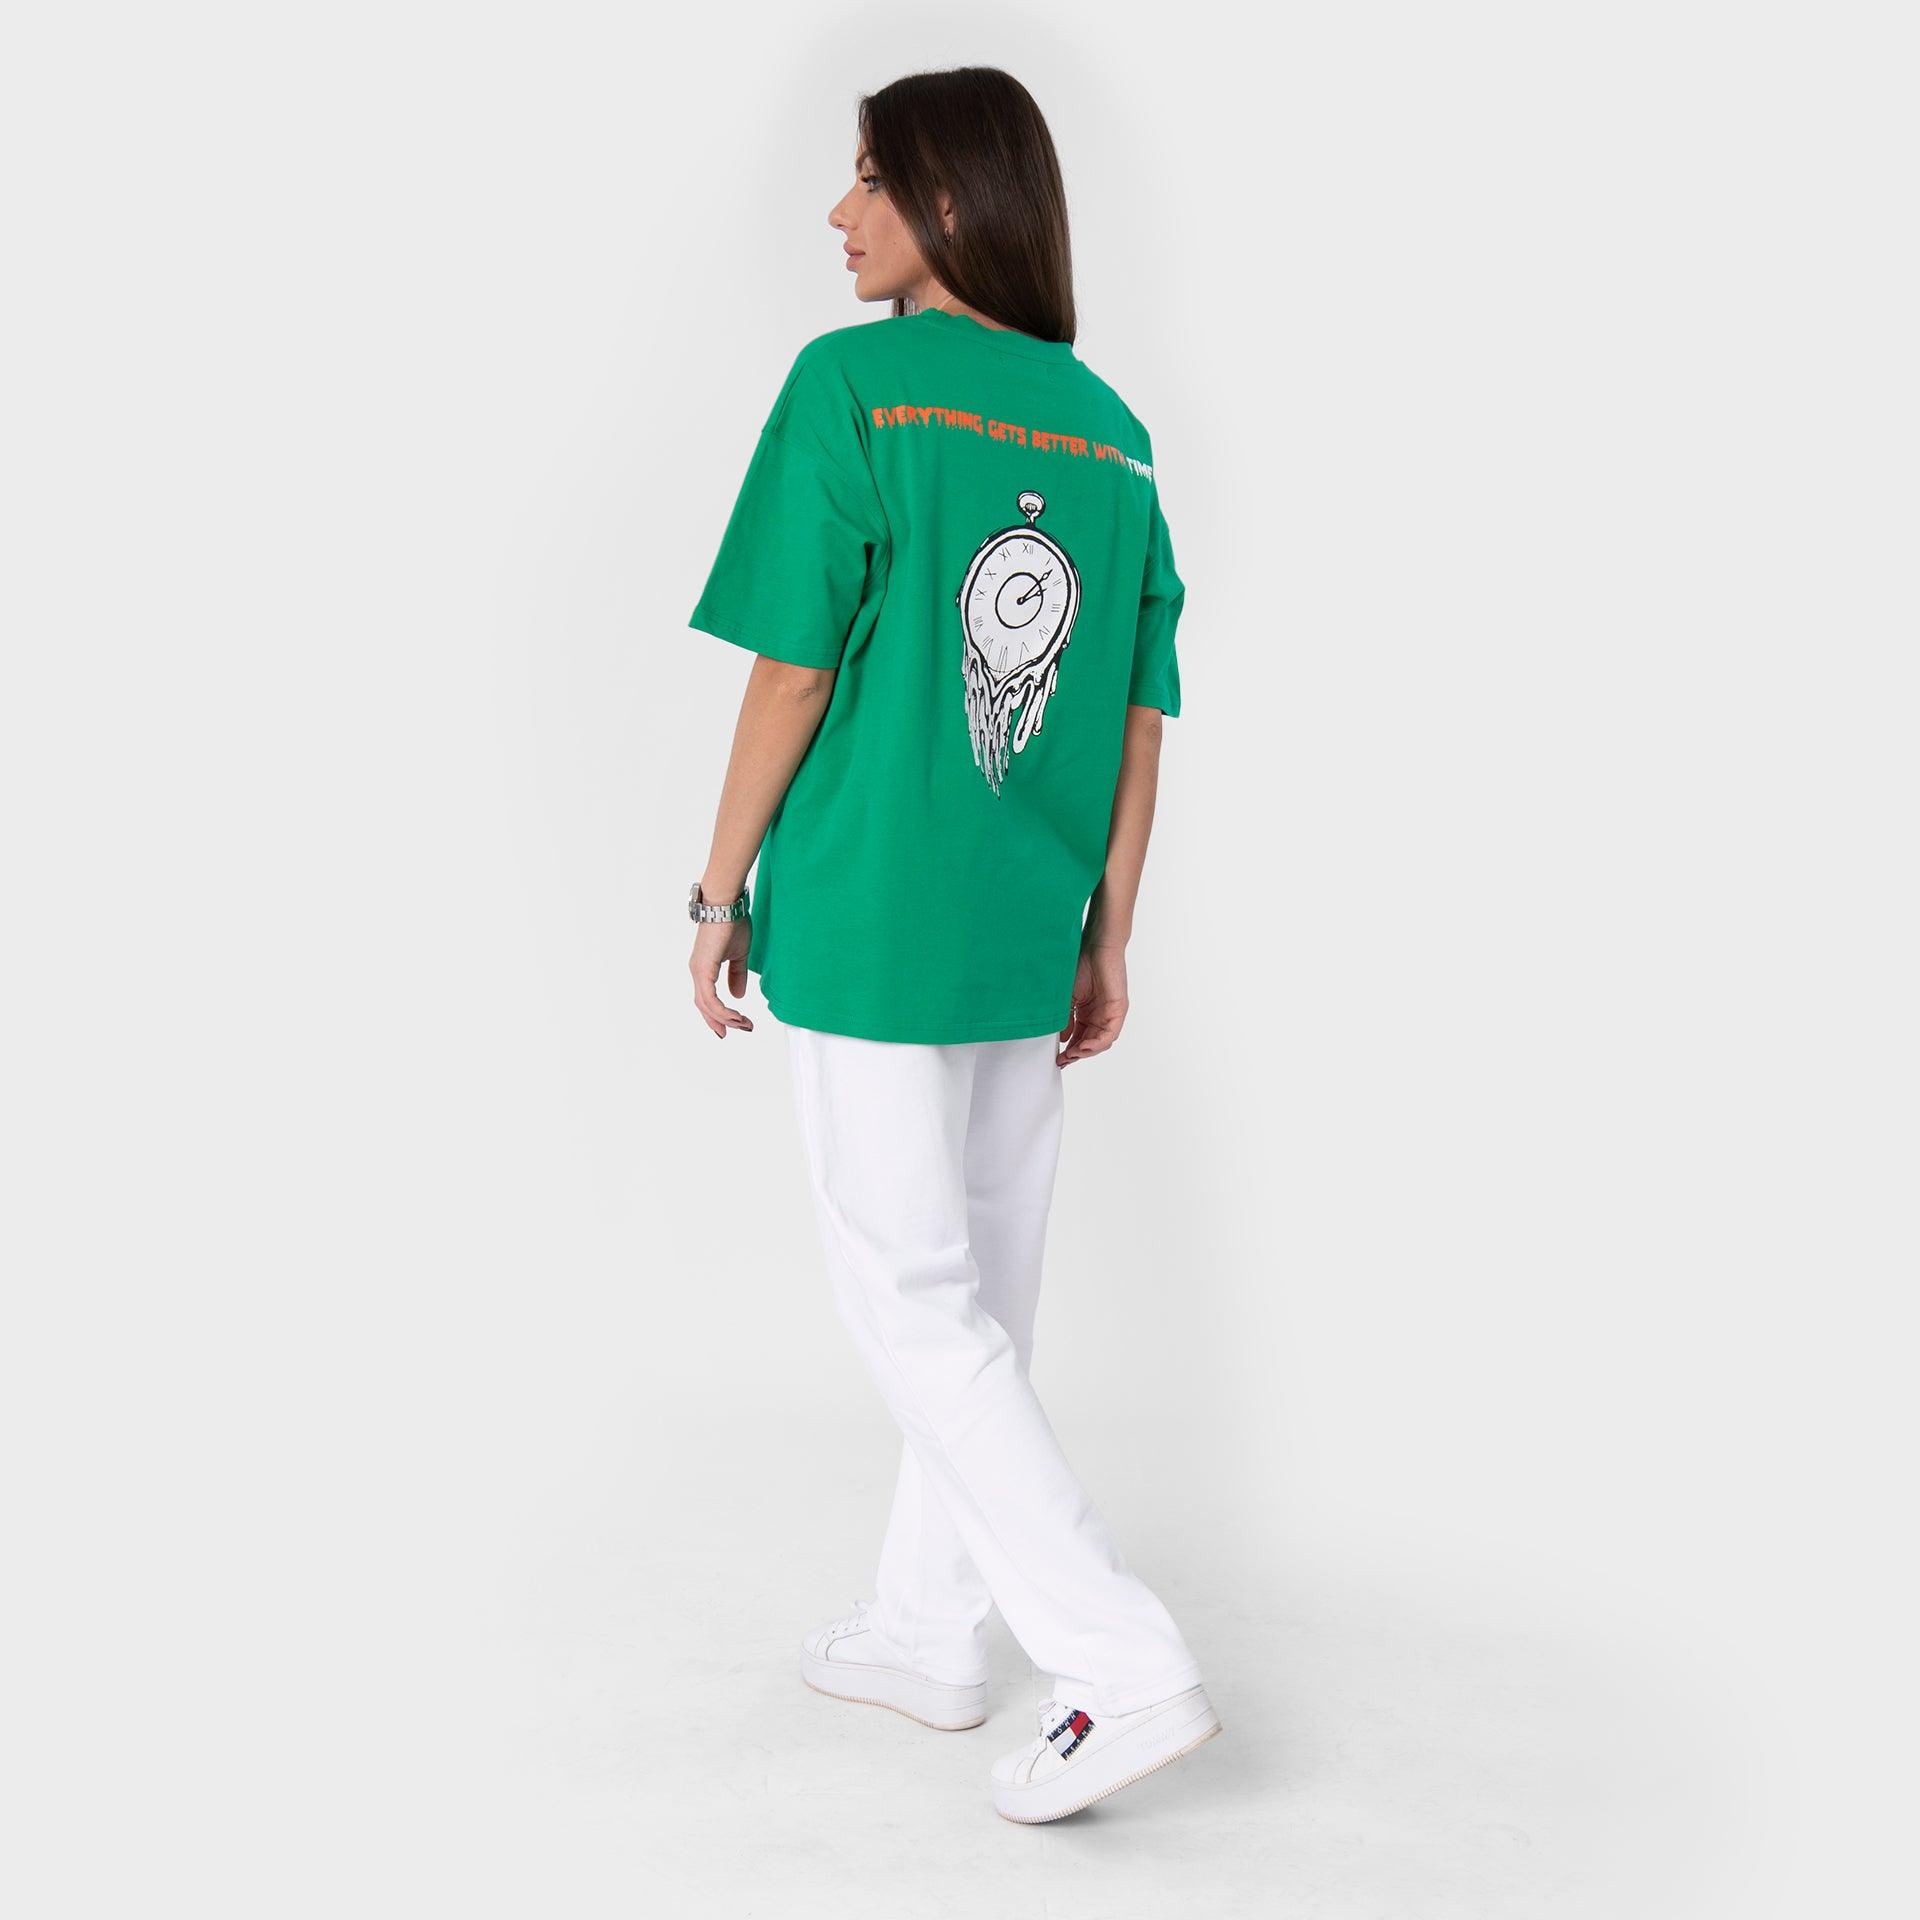 Green T-shirt with a Graphic and Sentence From Arc Design